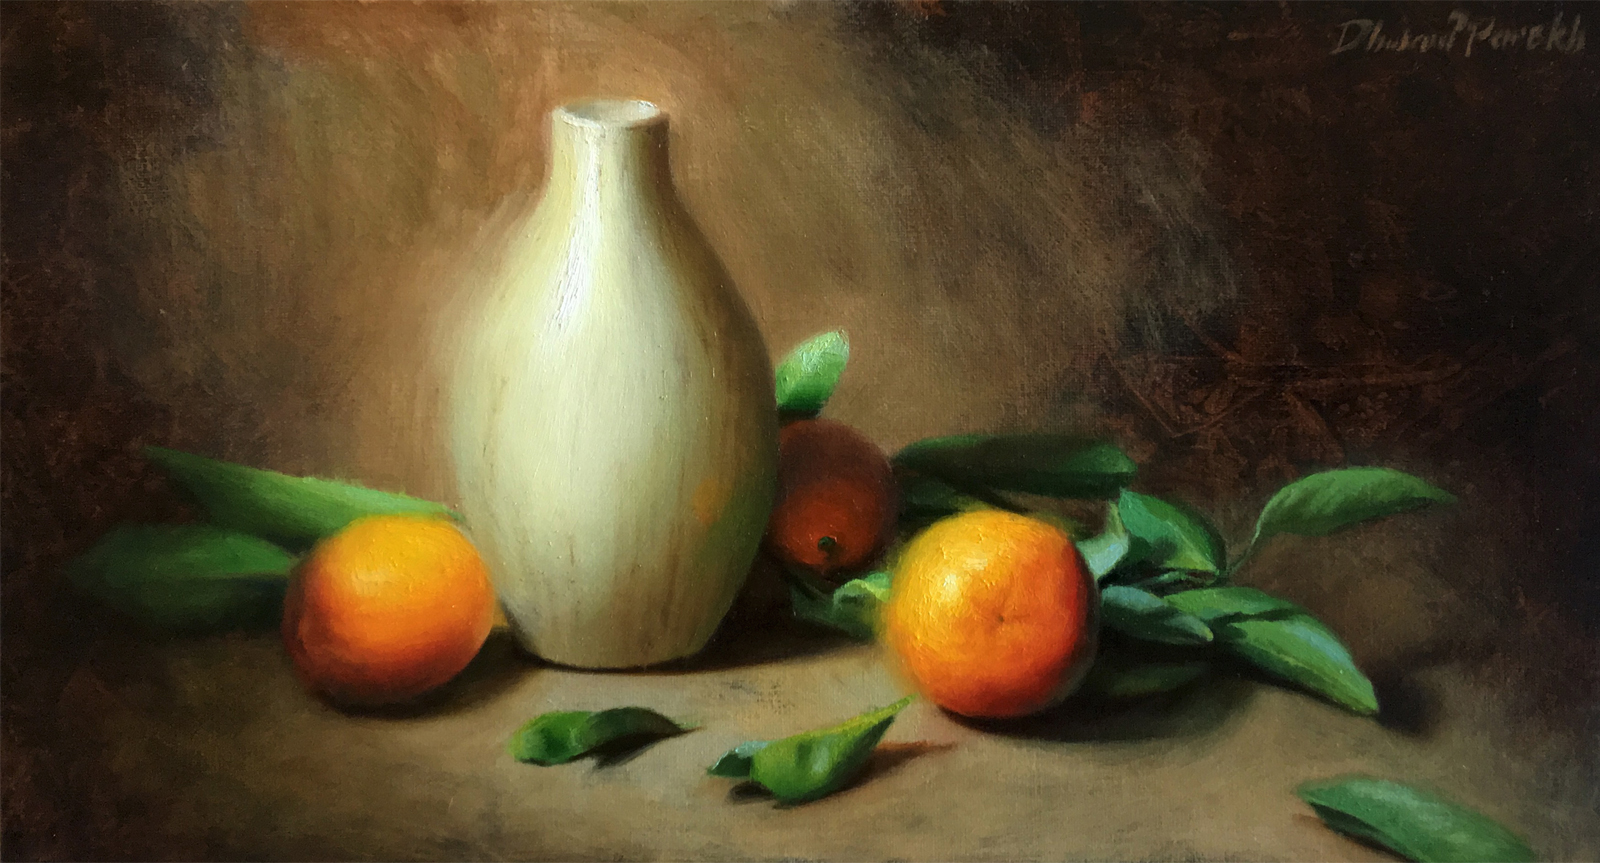  Between Oranges ll  20 x 11  Oil on Canvas 